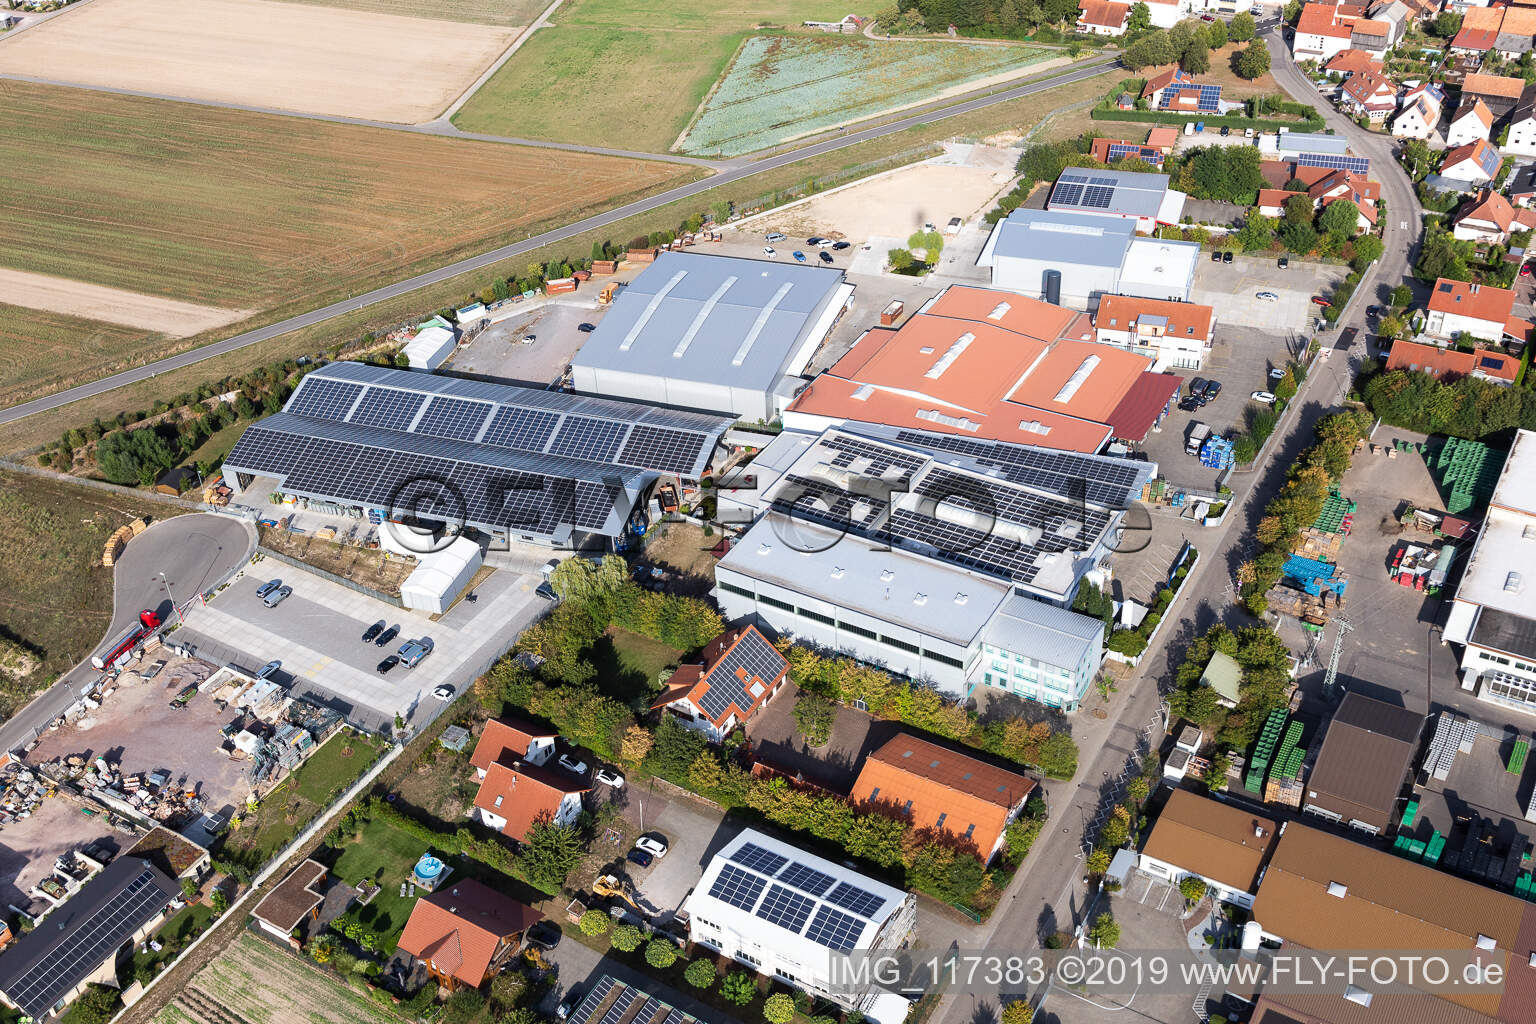 Aerial photograpy of Commercial area Im Gereut, HGGS LaserCUT GmbH & Co. KG in Hatzenbühl in the state Rhineland-Palatinate, Germany